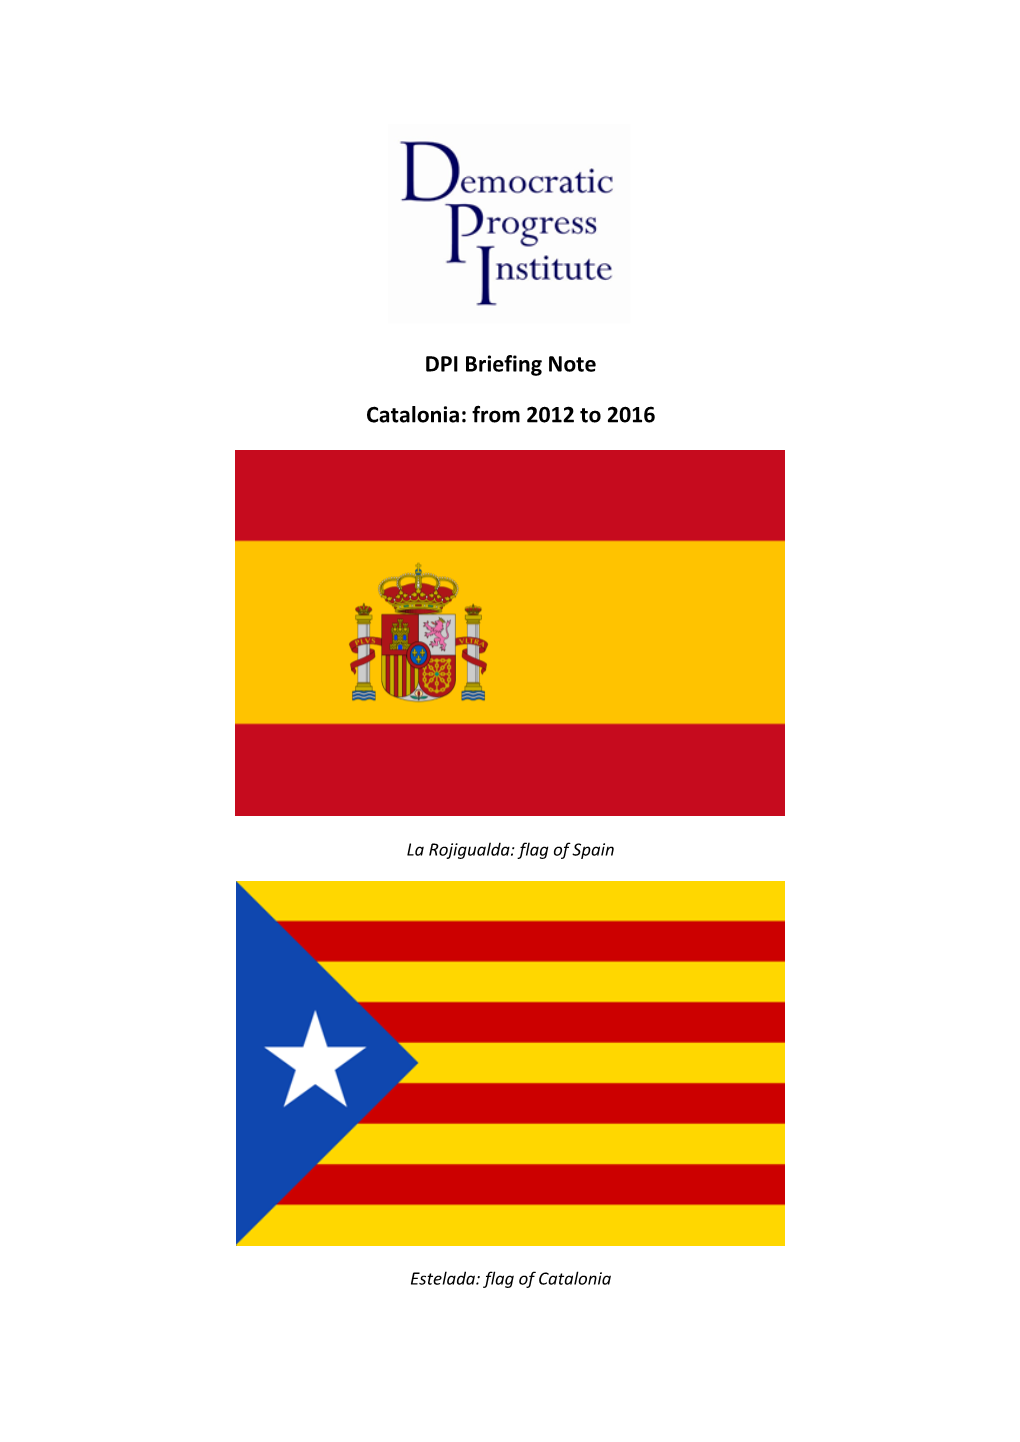 DPI Briefing Note Catalonia: from 2012 to 2016